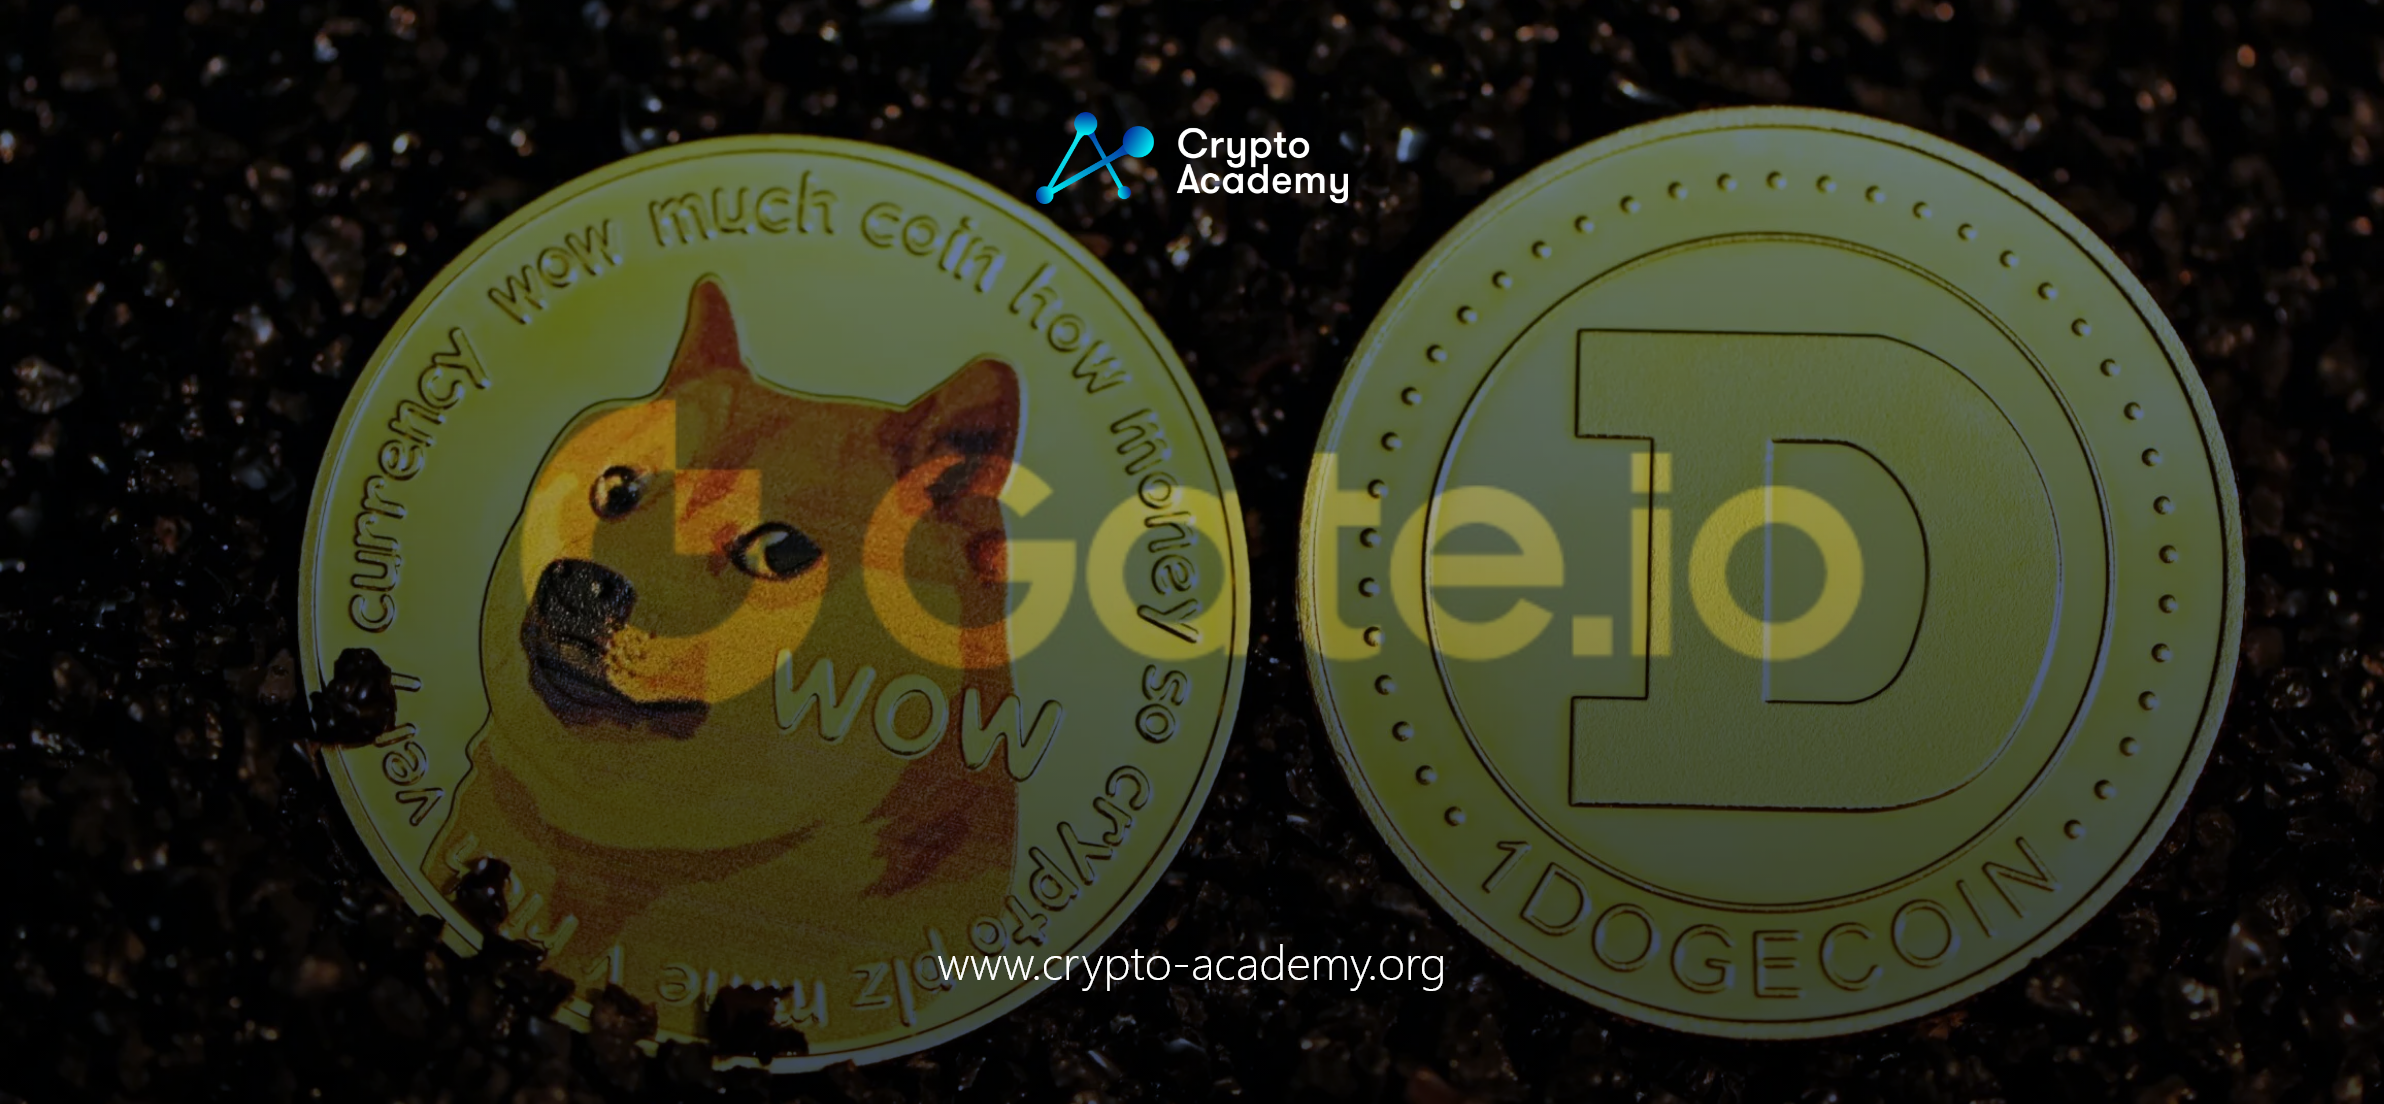 Surge in Dogecoin Value Amid Rumors of Twitter Payment Integration